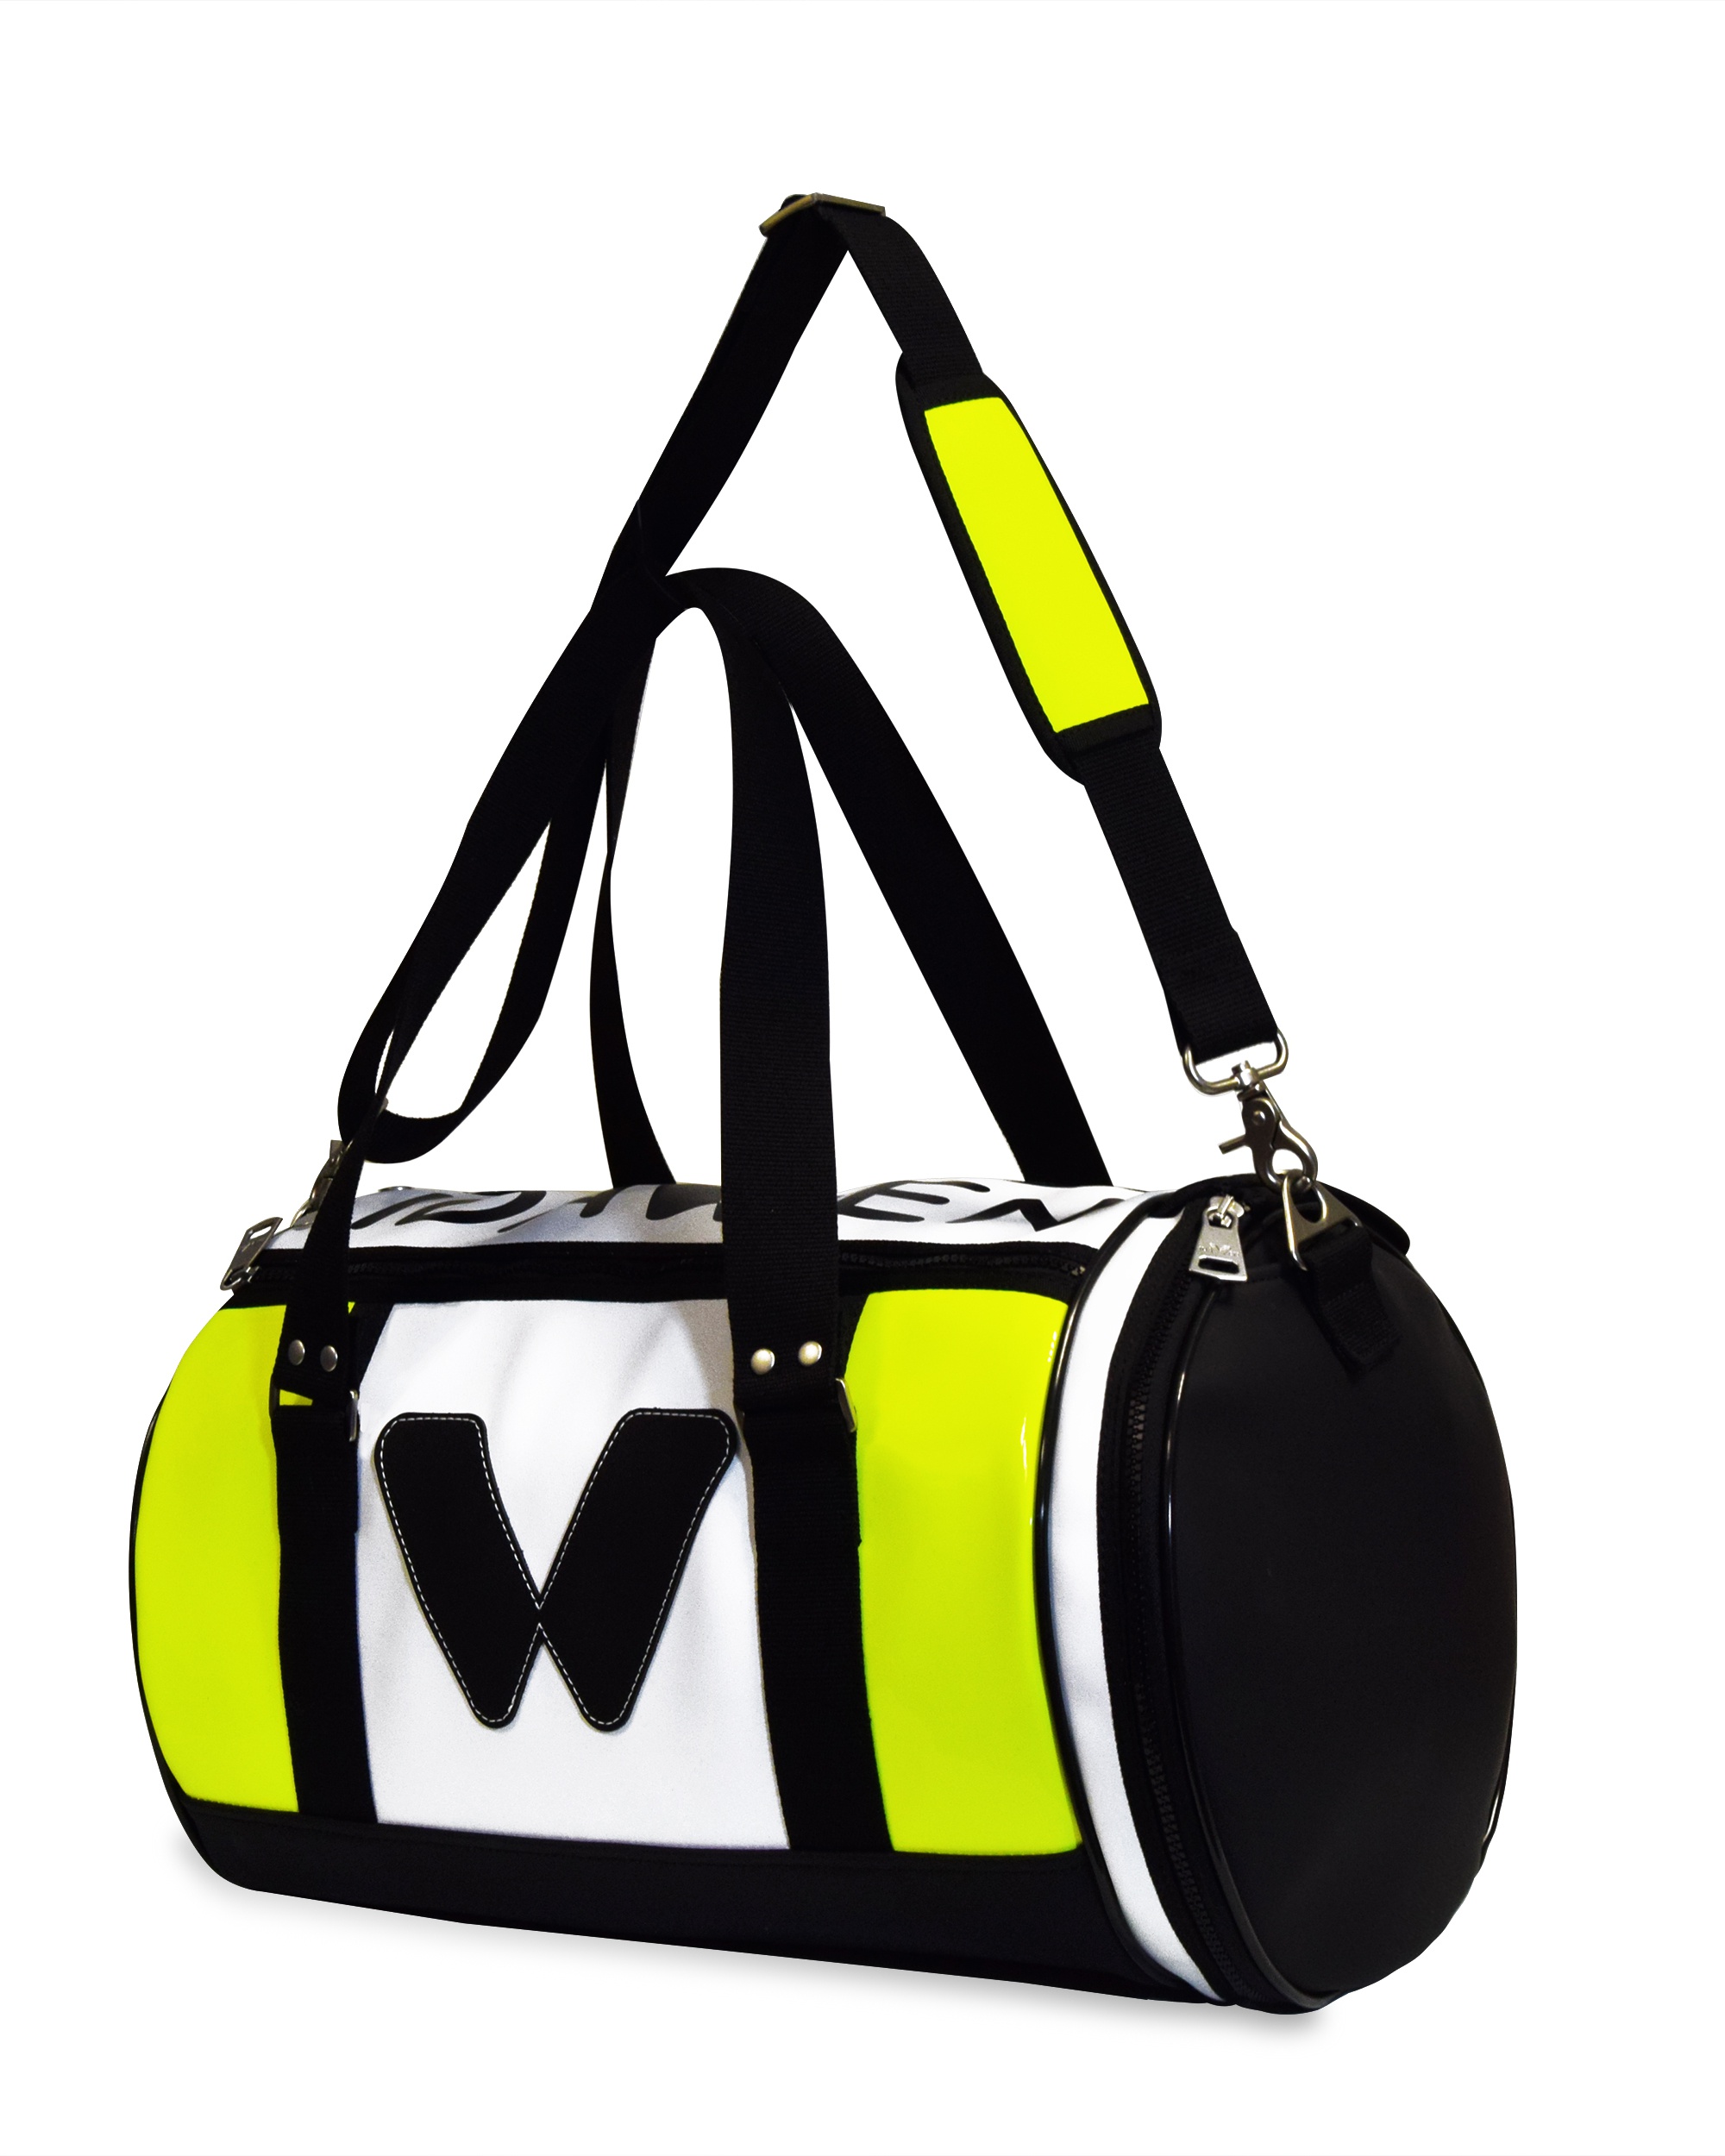 DUFFLE SPORT BAG NEON Sports bag. You choose the sport and